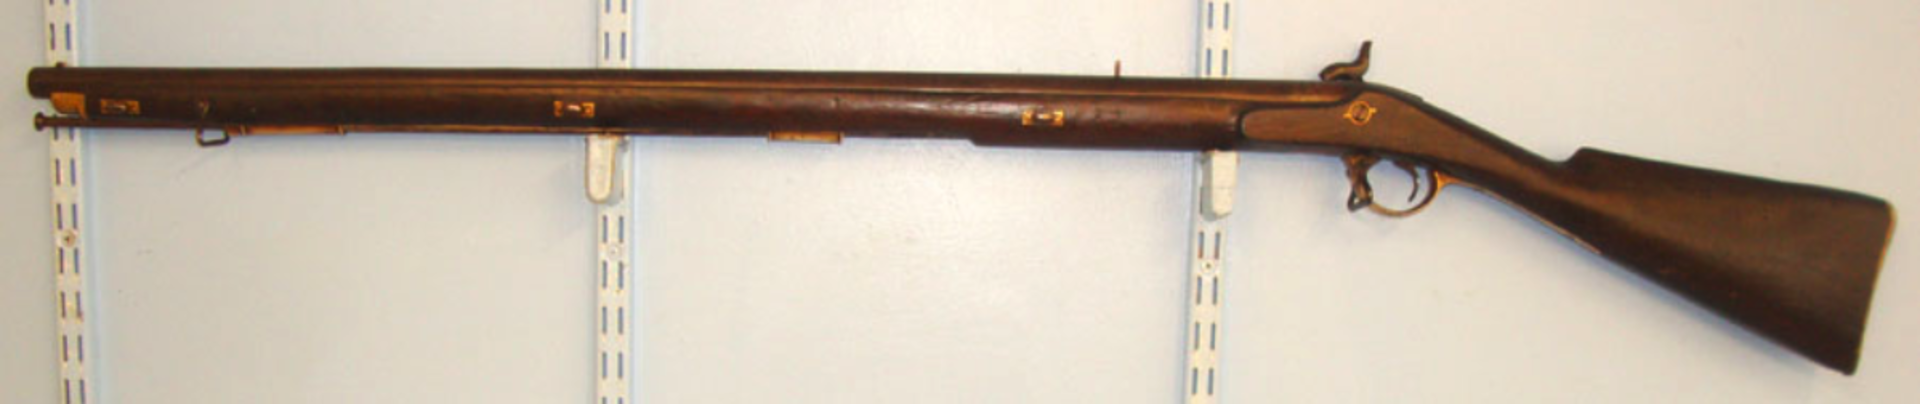 Victorian British Army In India .650 Bore Percussion Musket With Fitting For Brunswick Bayonet. - Image 3 of 3